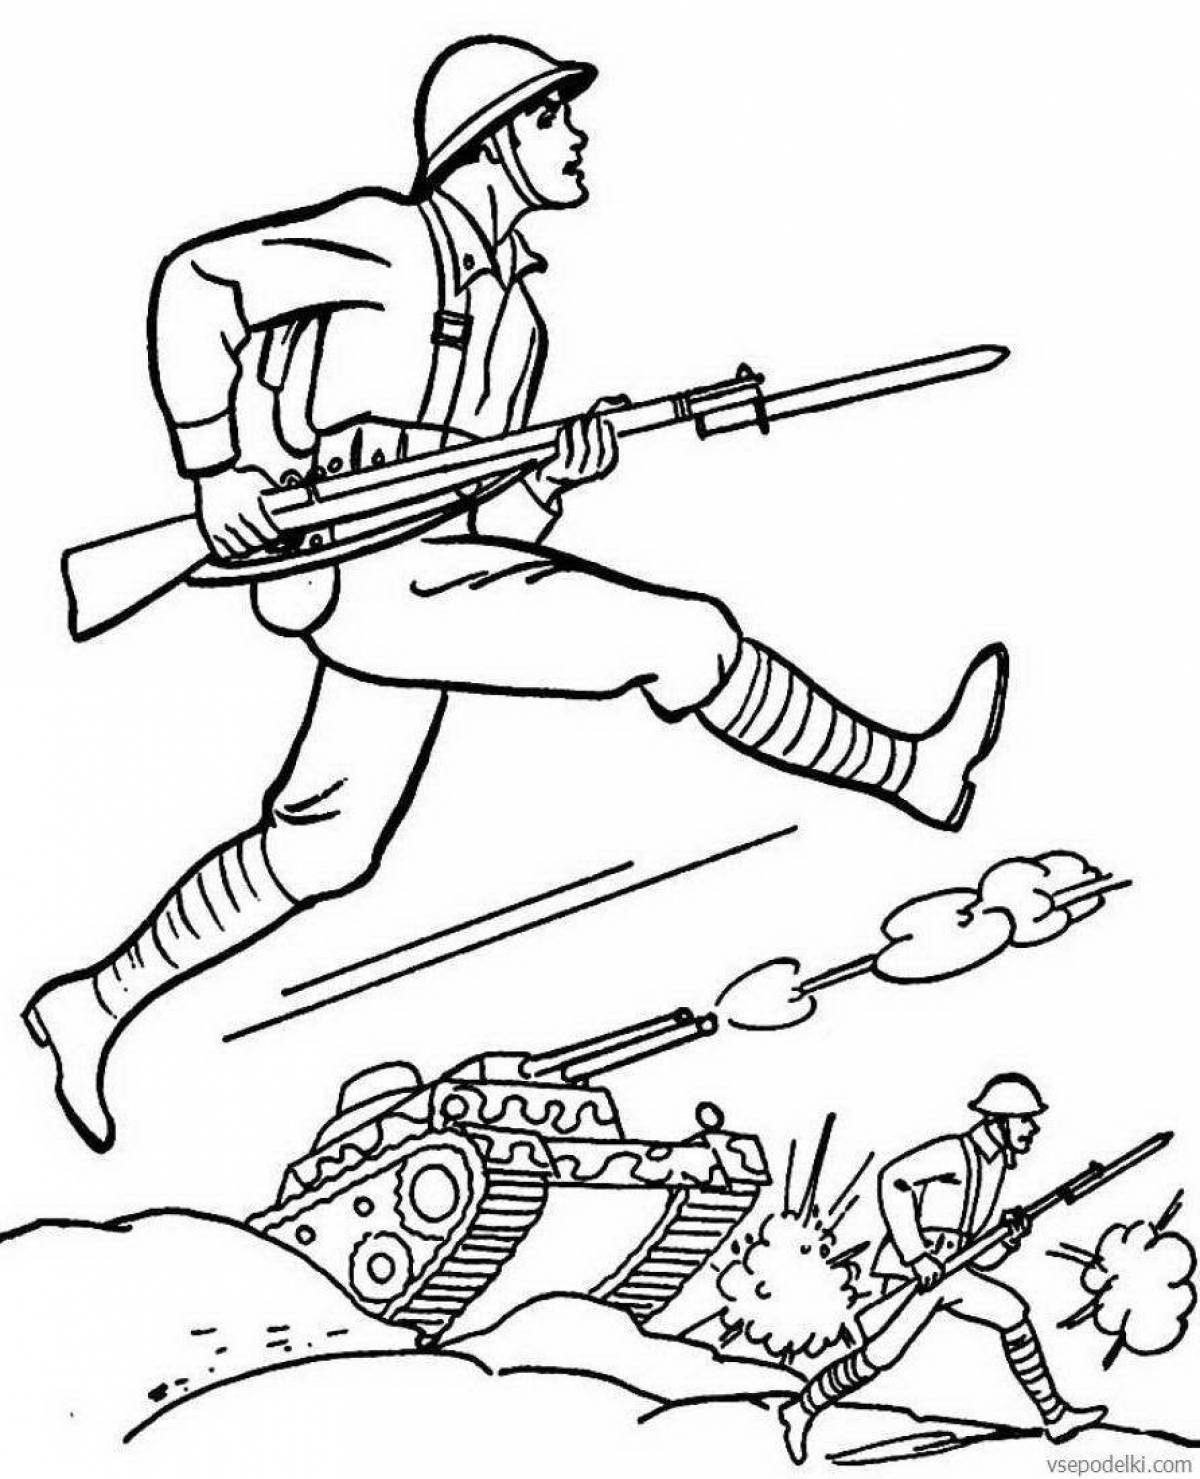 Animated infantry coloring page for students